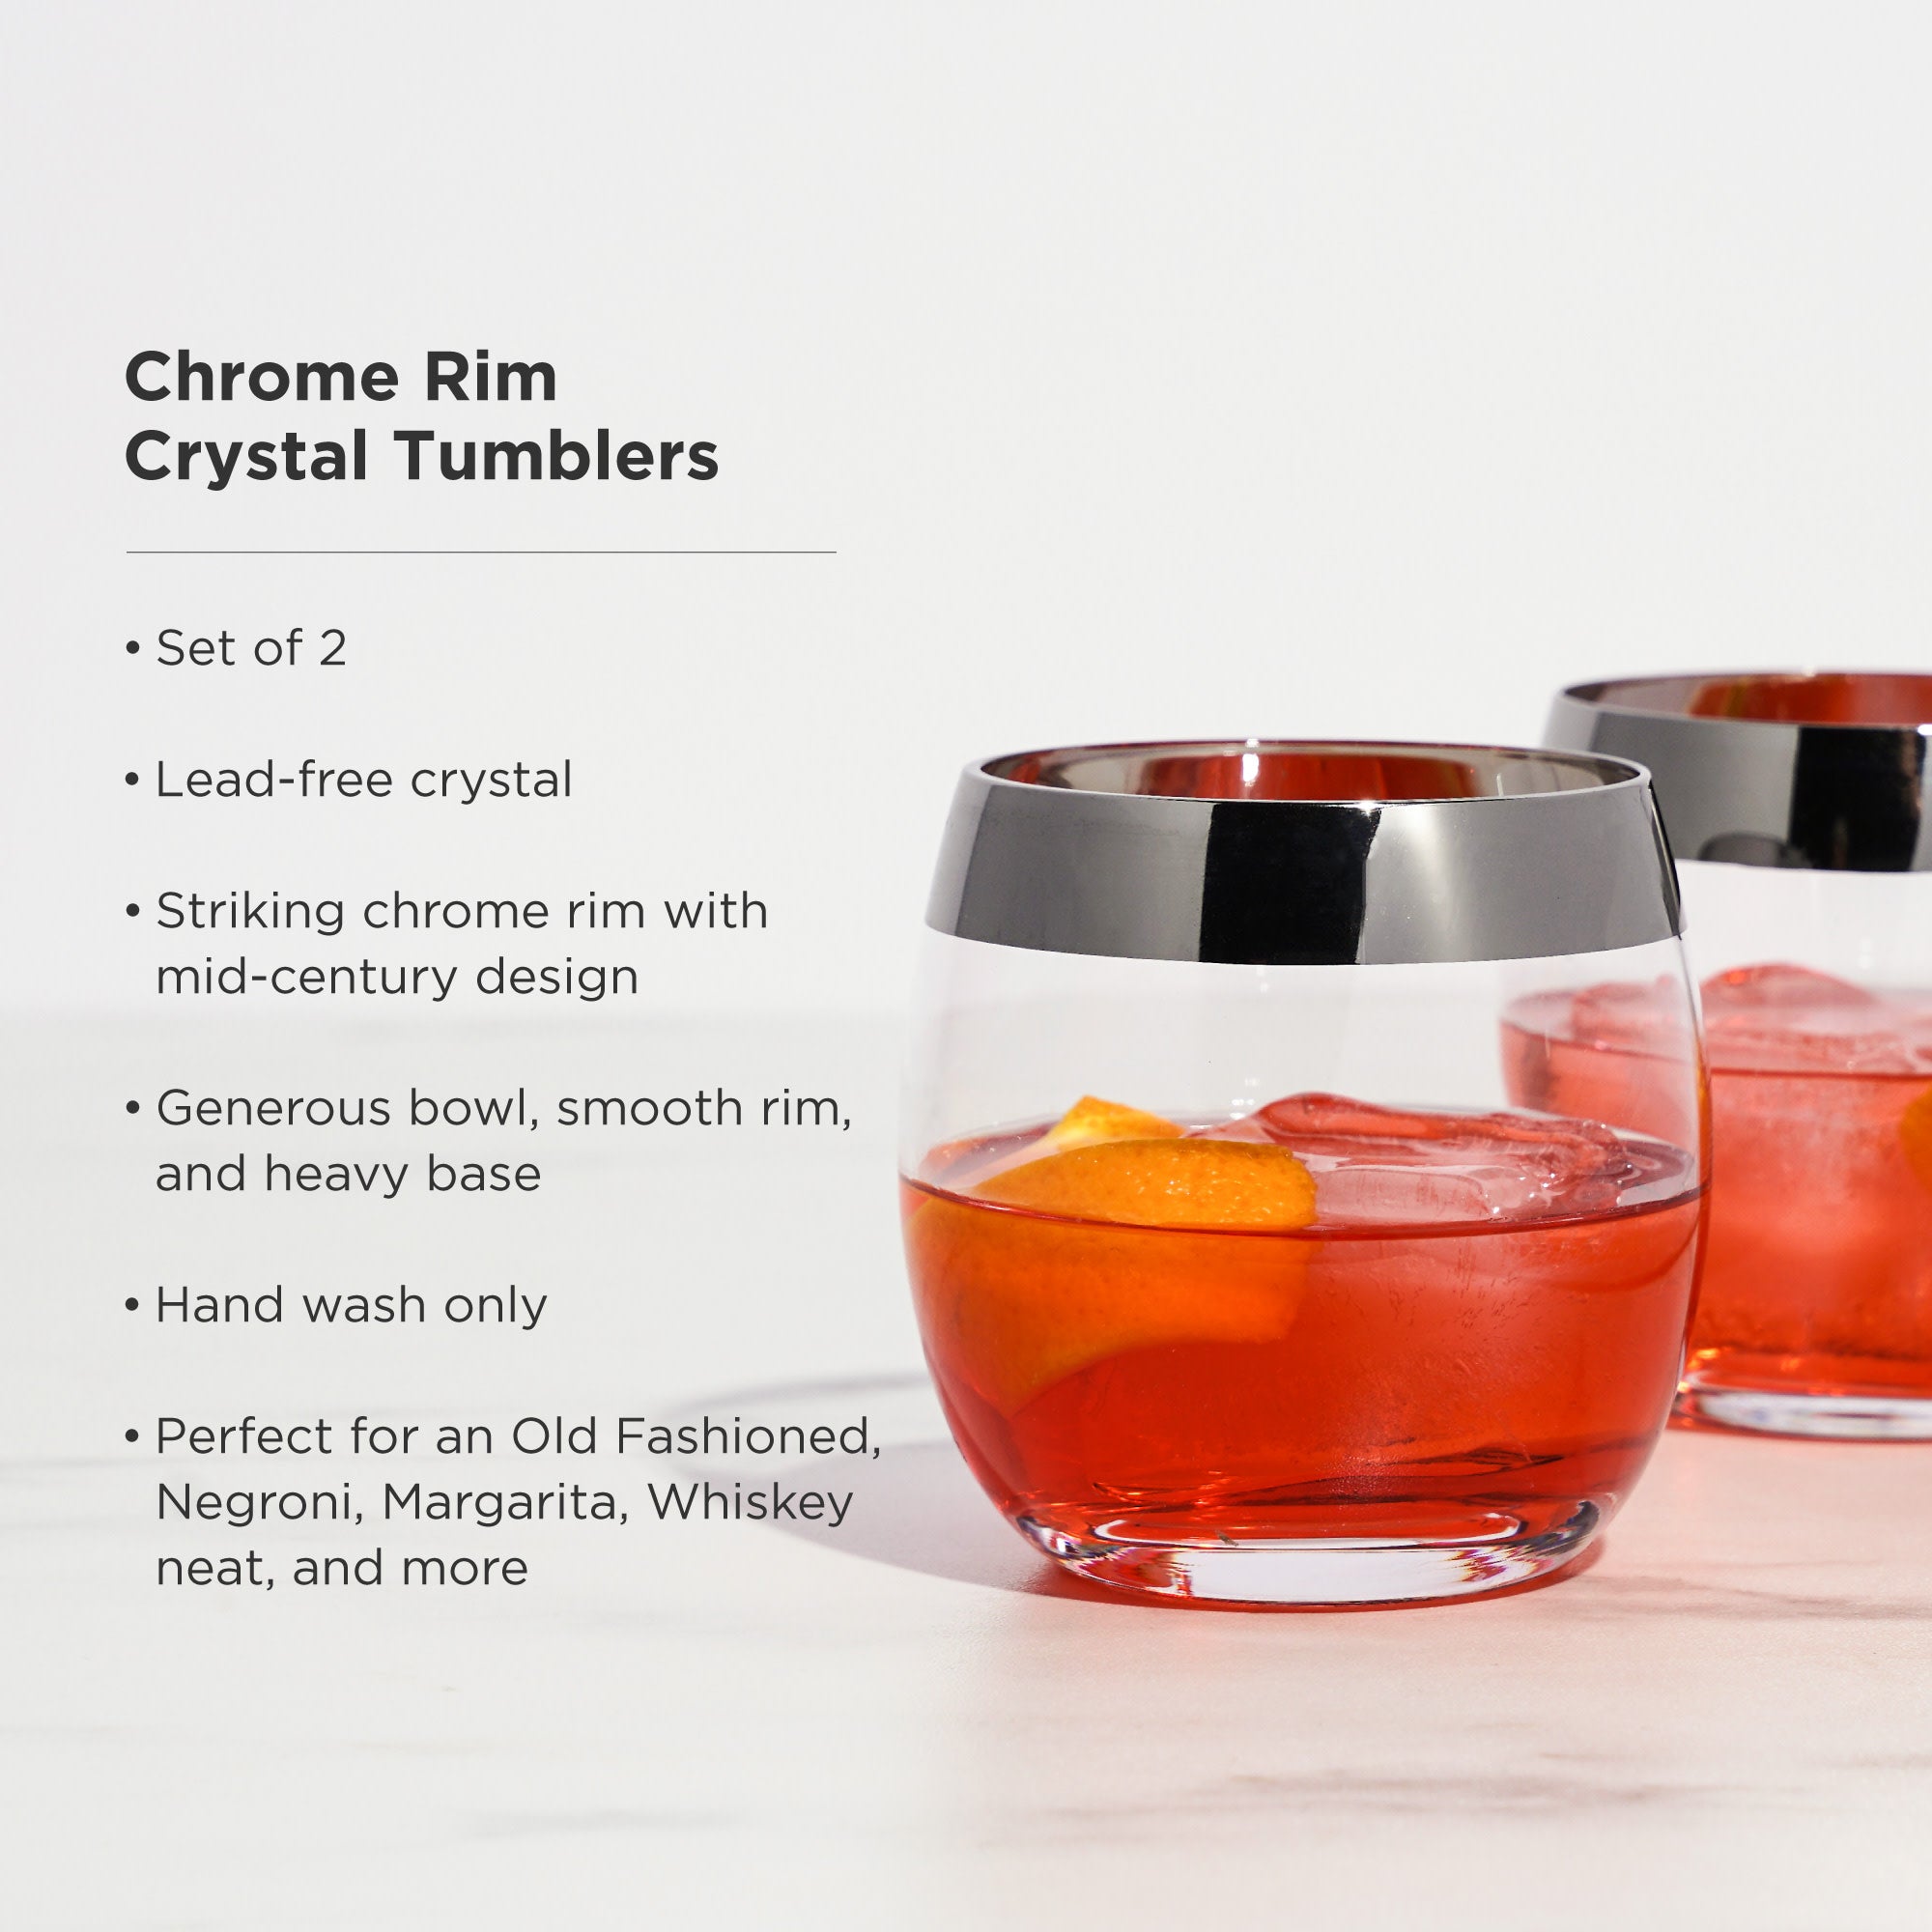 Crystal Tumbler - For drinks on the rocks or crafted cocktails – Norlan